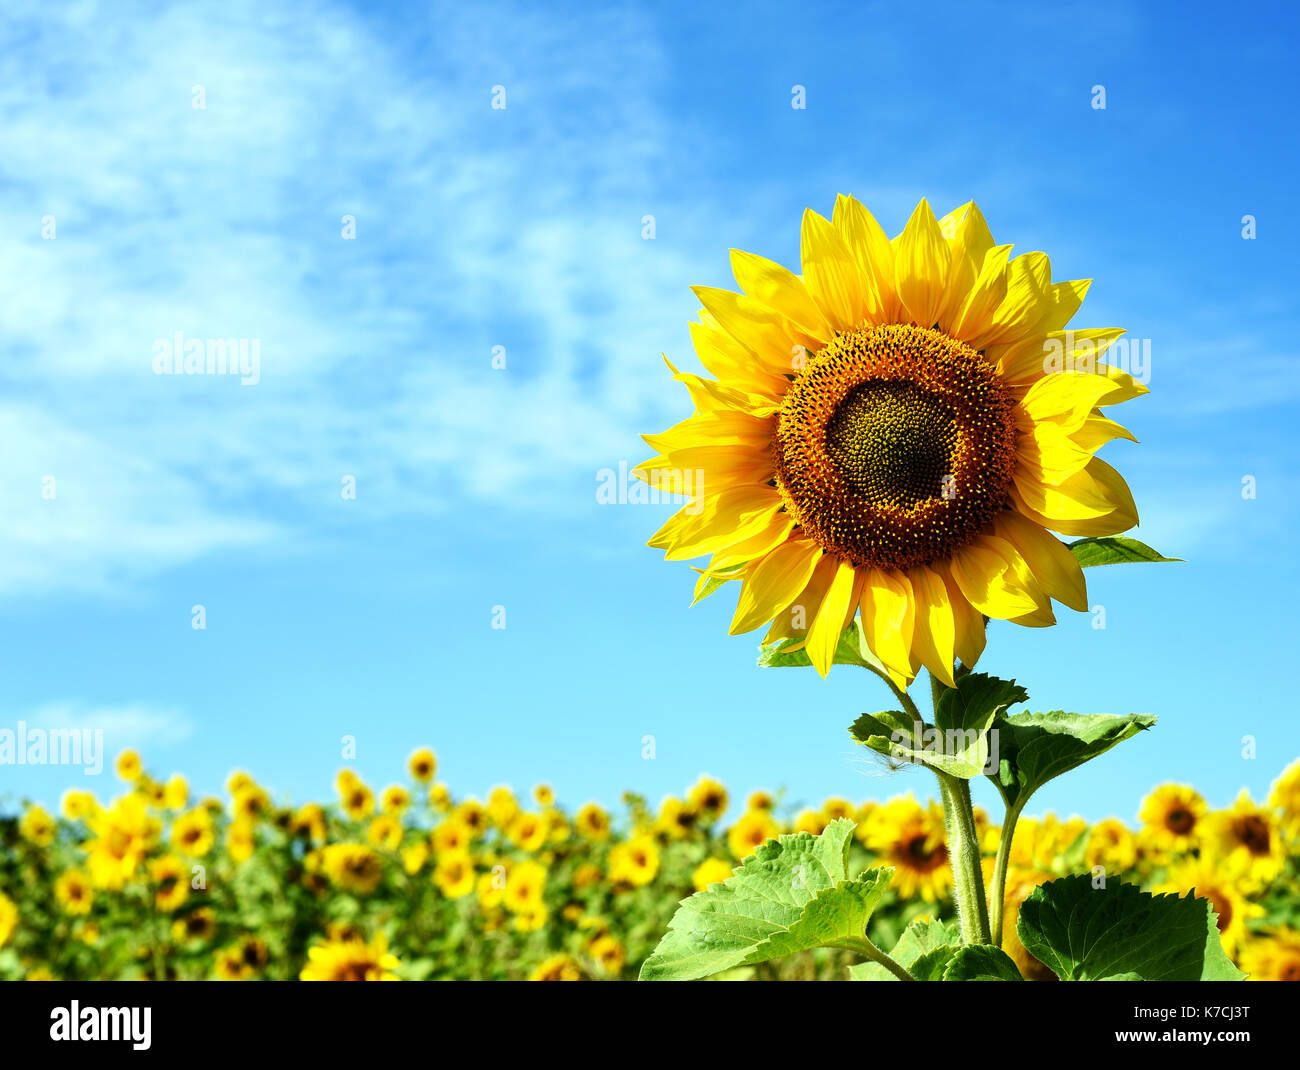 Yellow Sunflower Background With Wild Flowers Growing In A Field